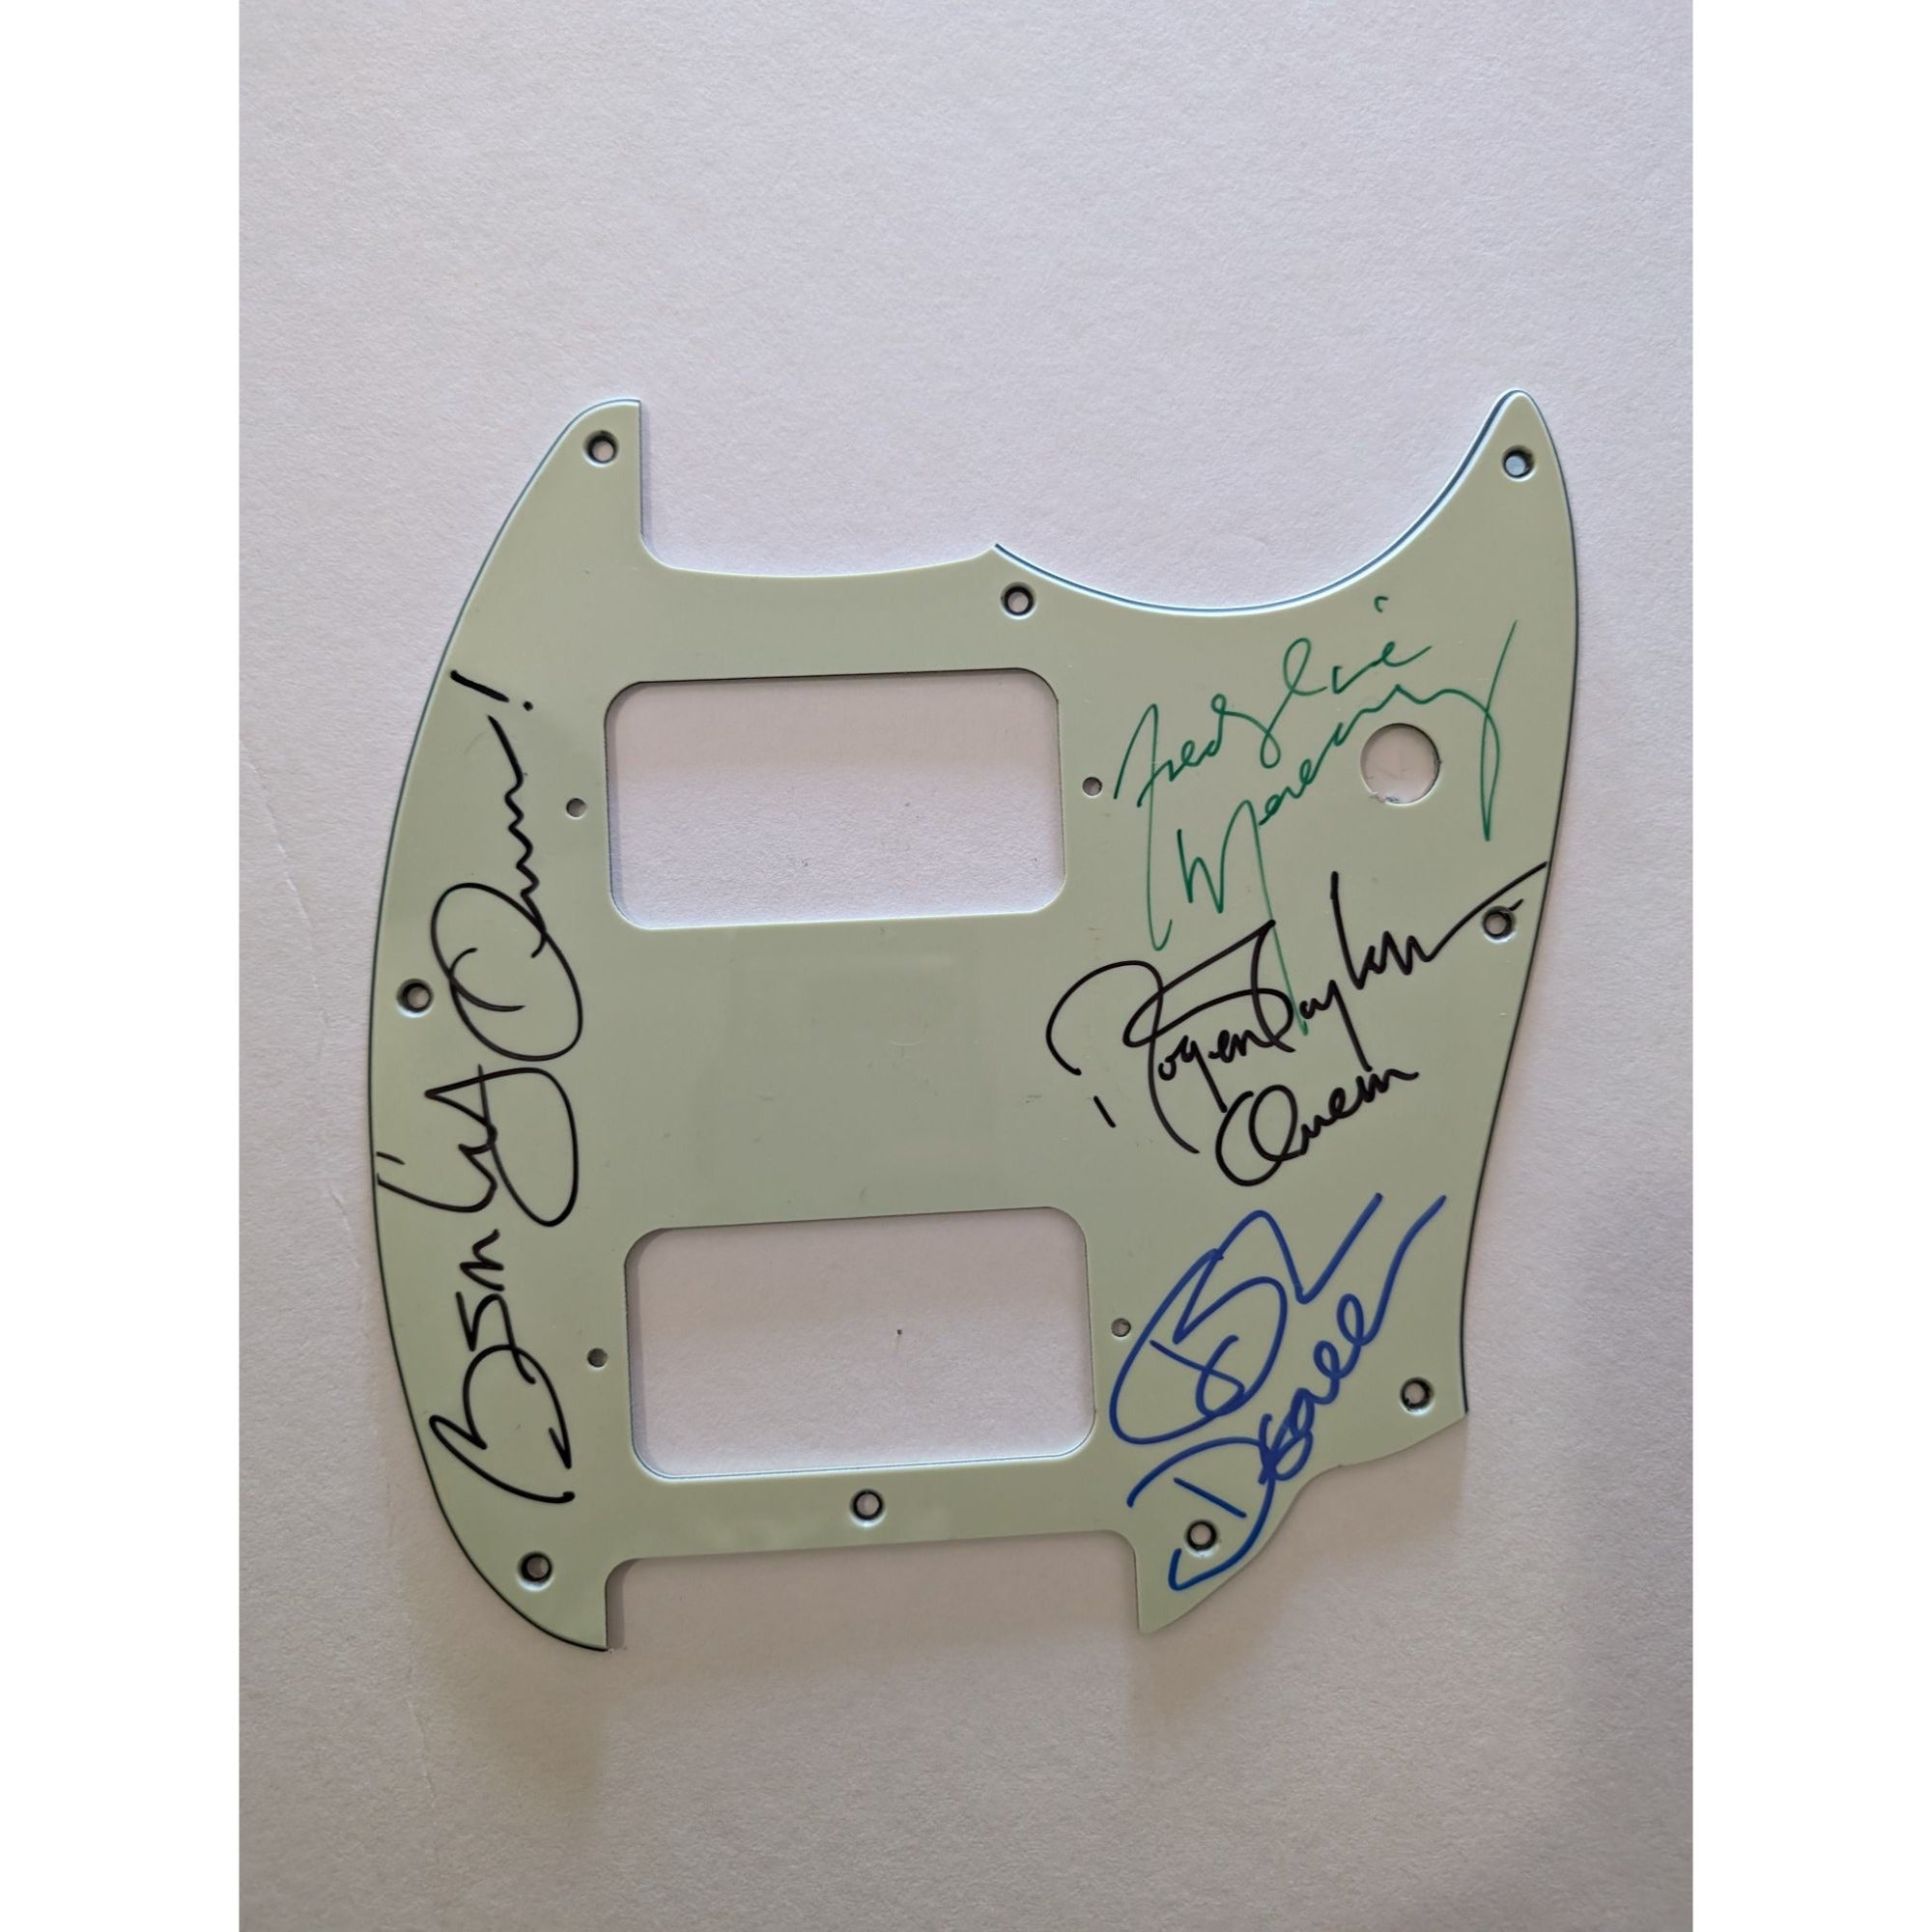 Freddie Mercury Brian May Roger Taylor John Deacon incredible Queen fender telecaster pickguard signed with proof